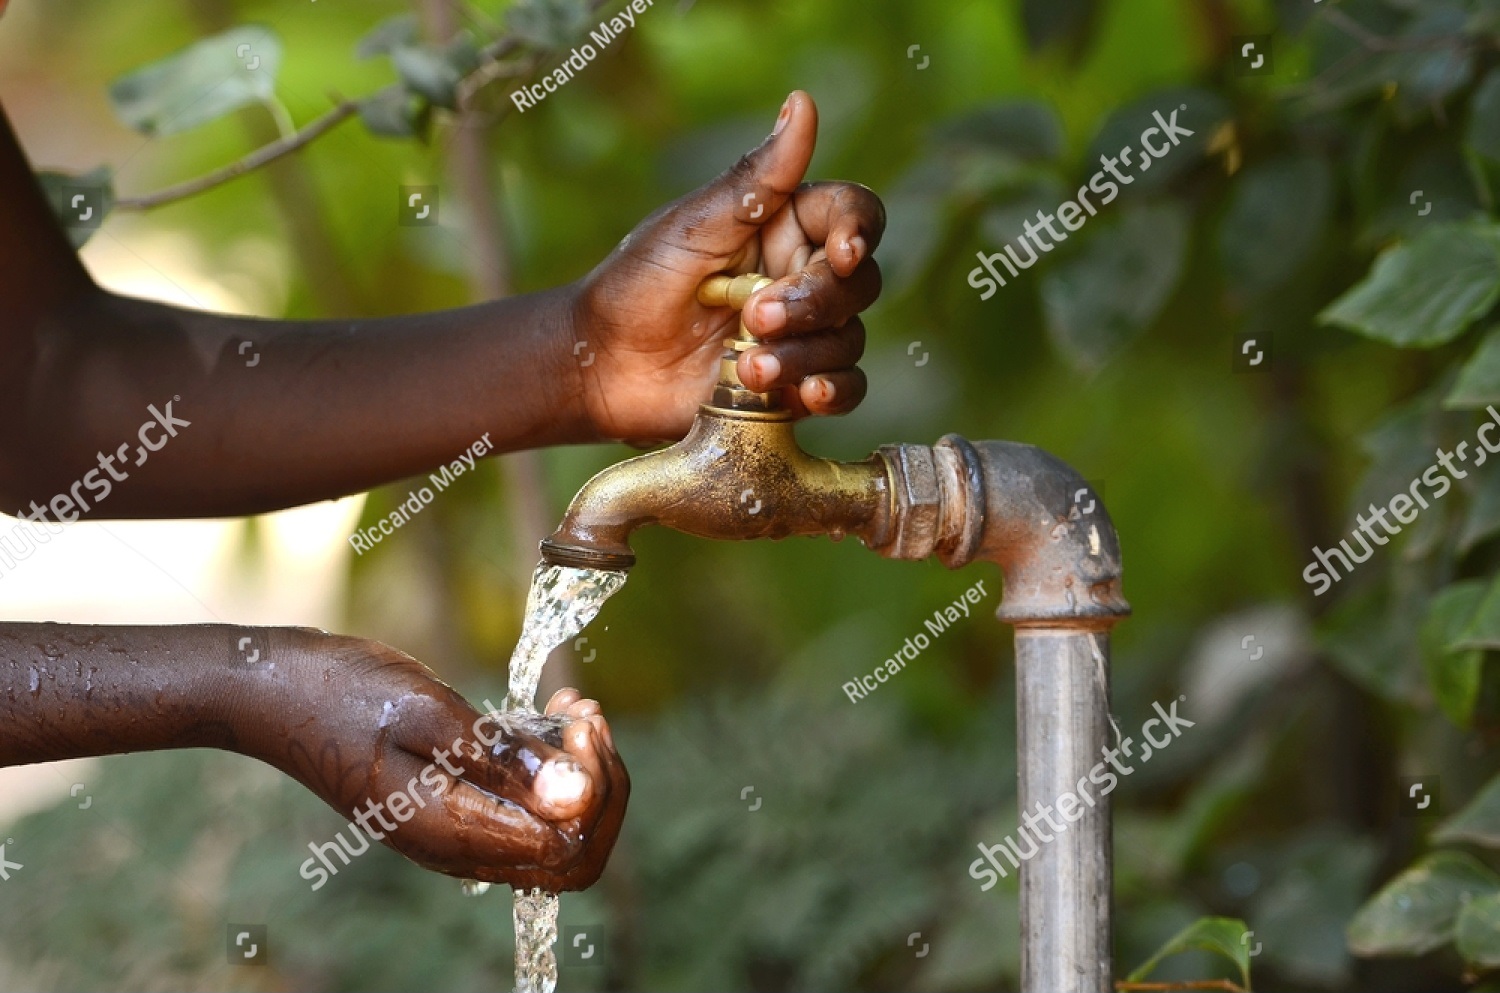 stock-photo-drinking-water-from-a-tap-water-scarsity-symbol-246601234